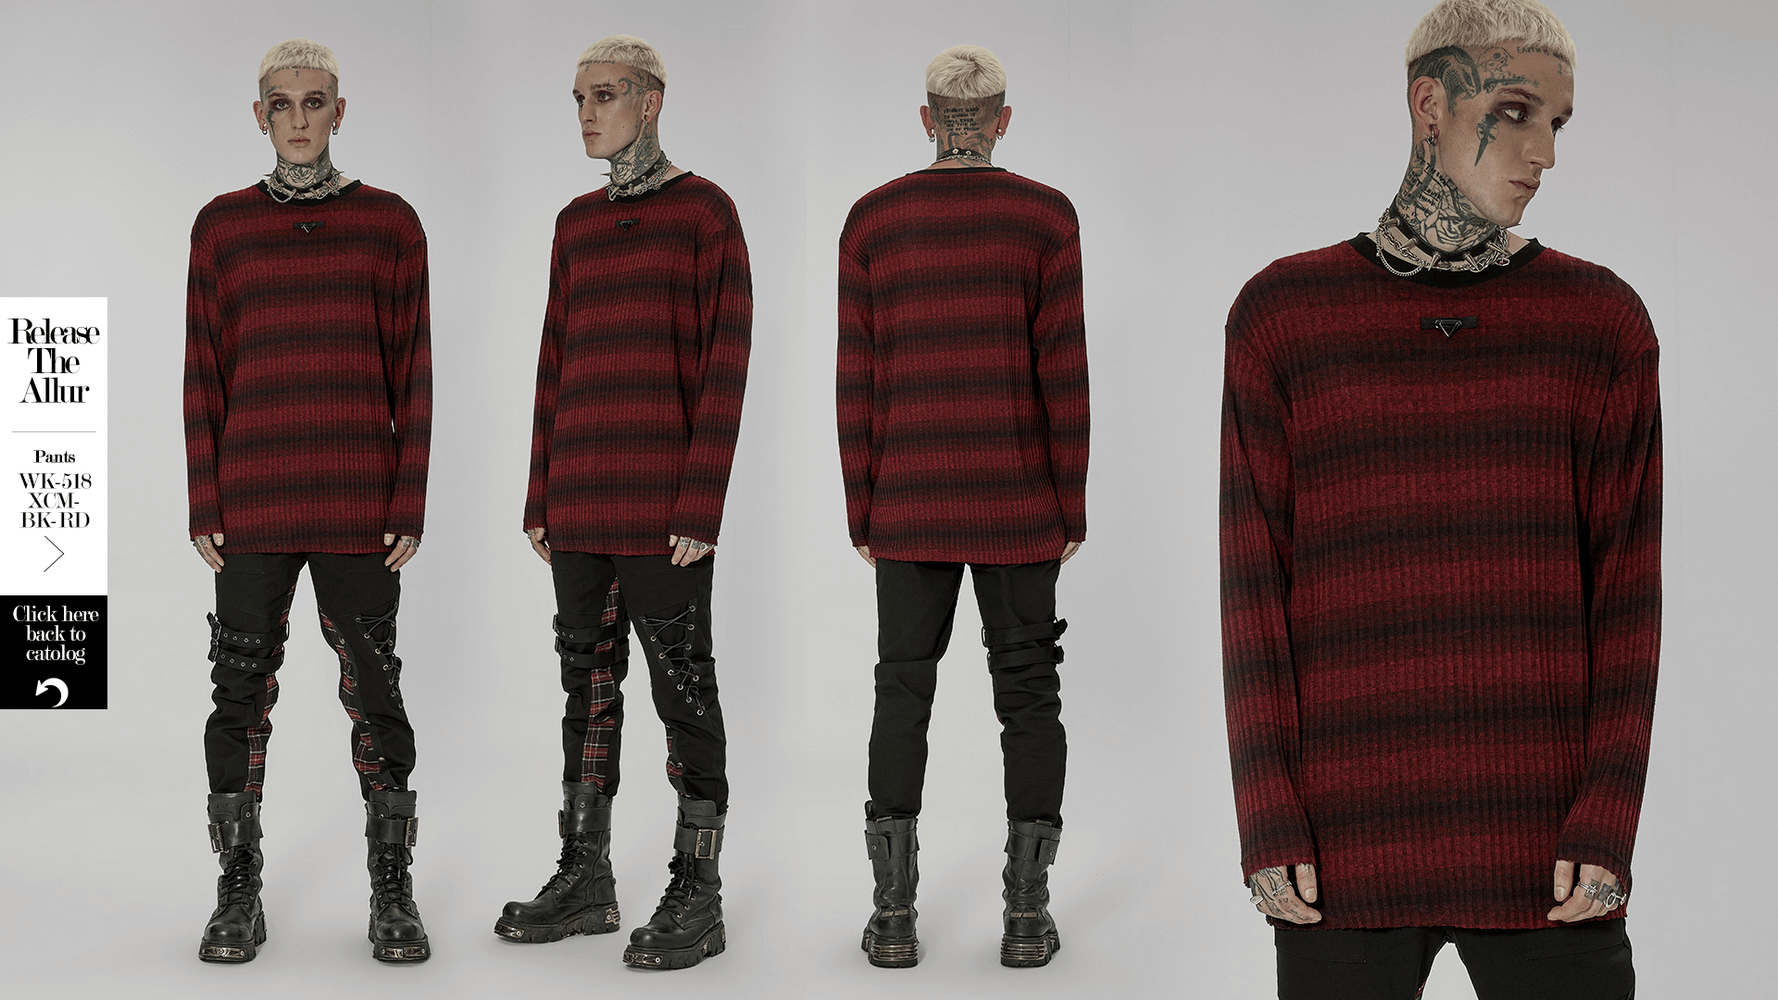 Men's Edgy Striped Knit Sweater with Metal Detail